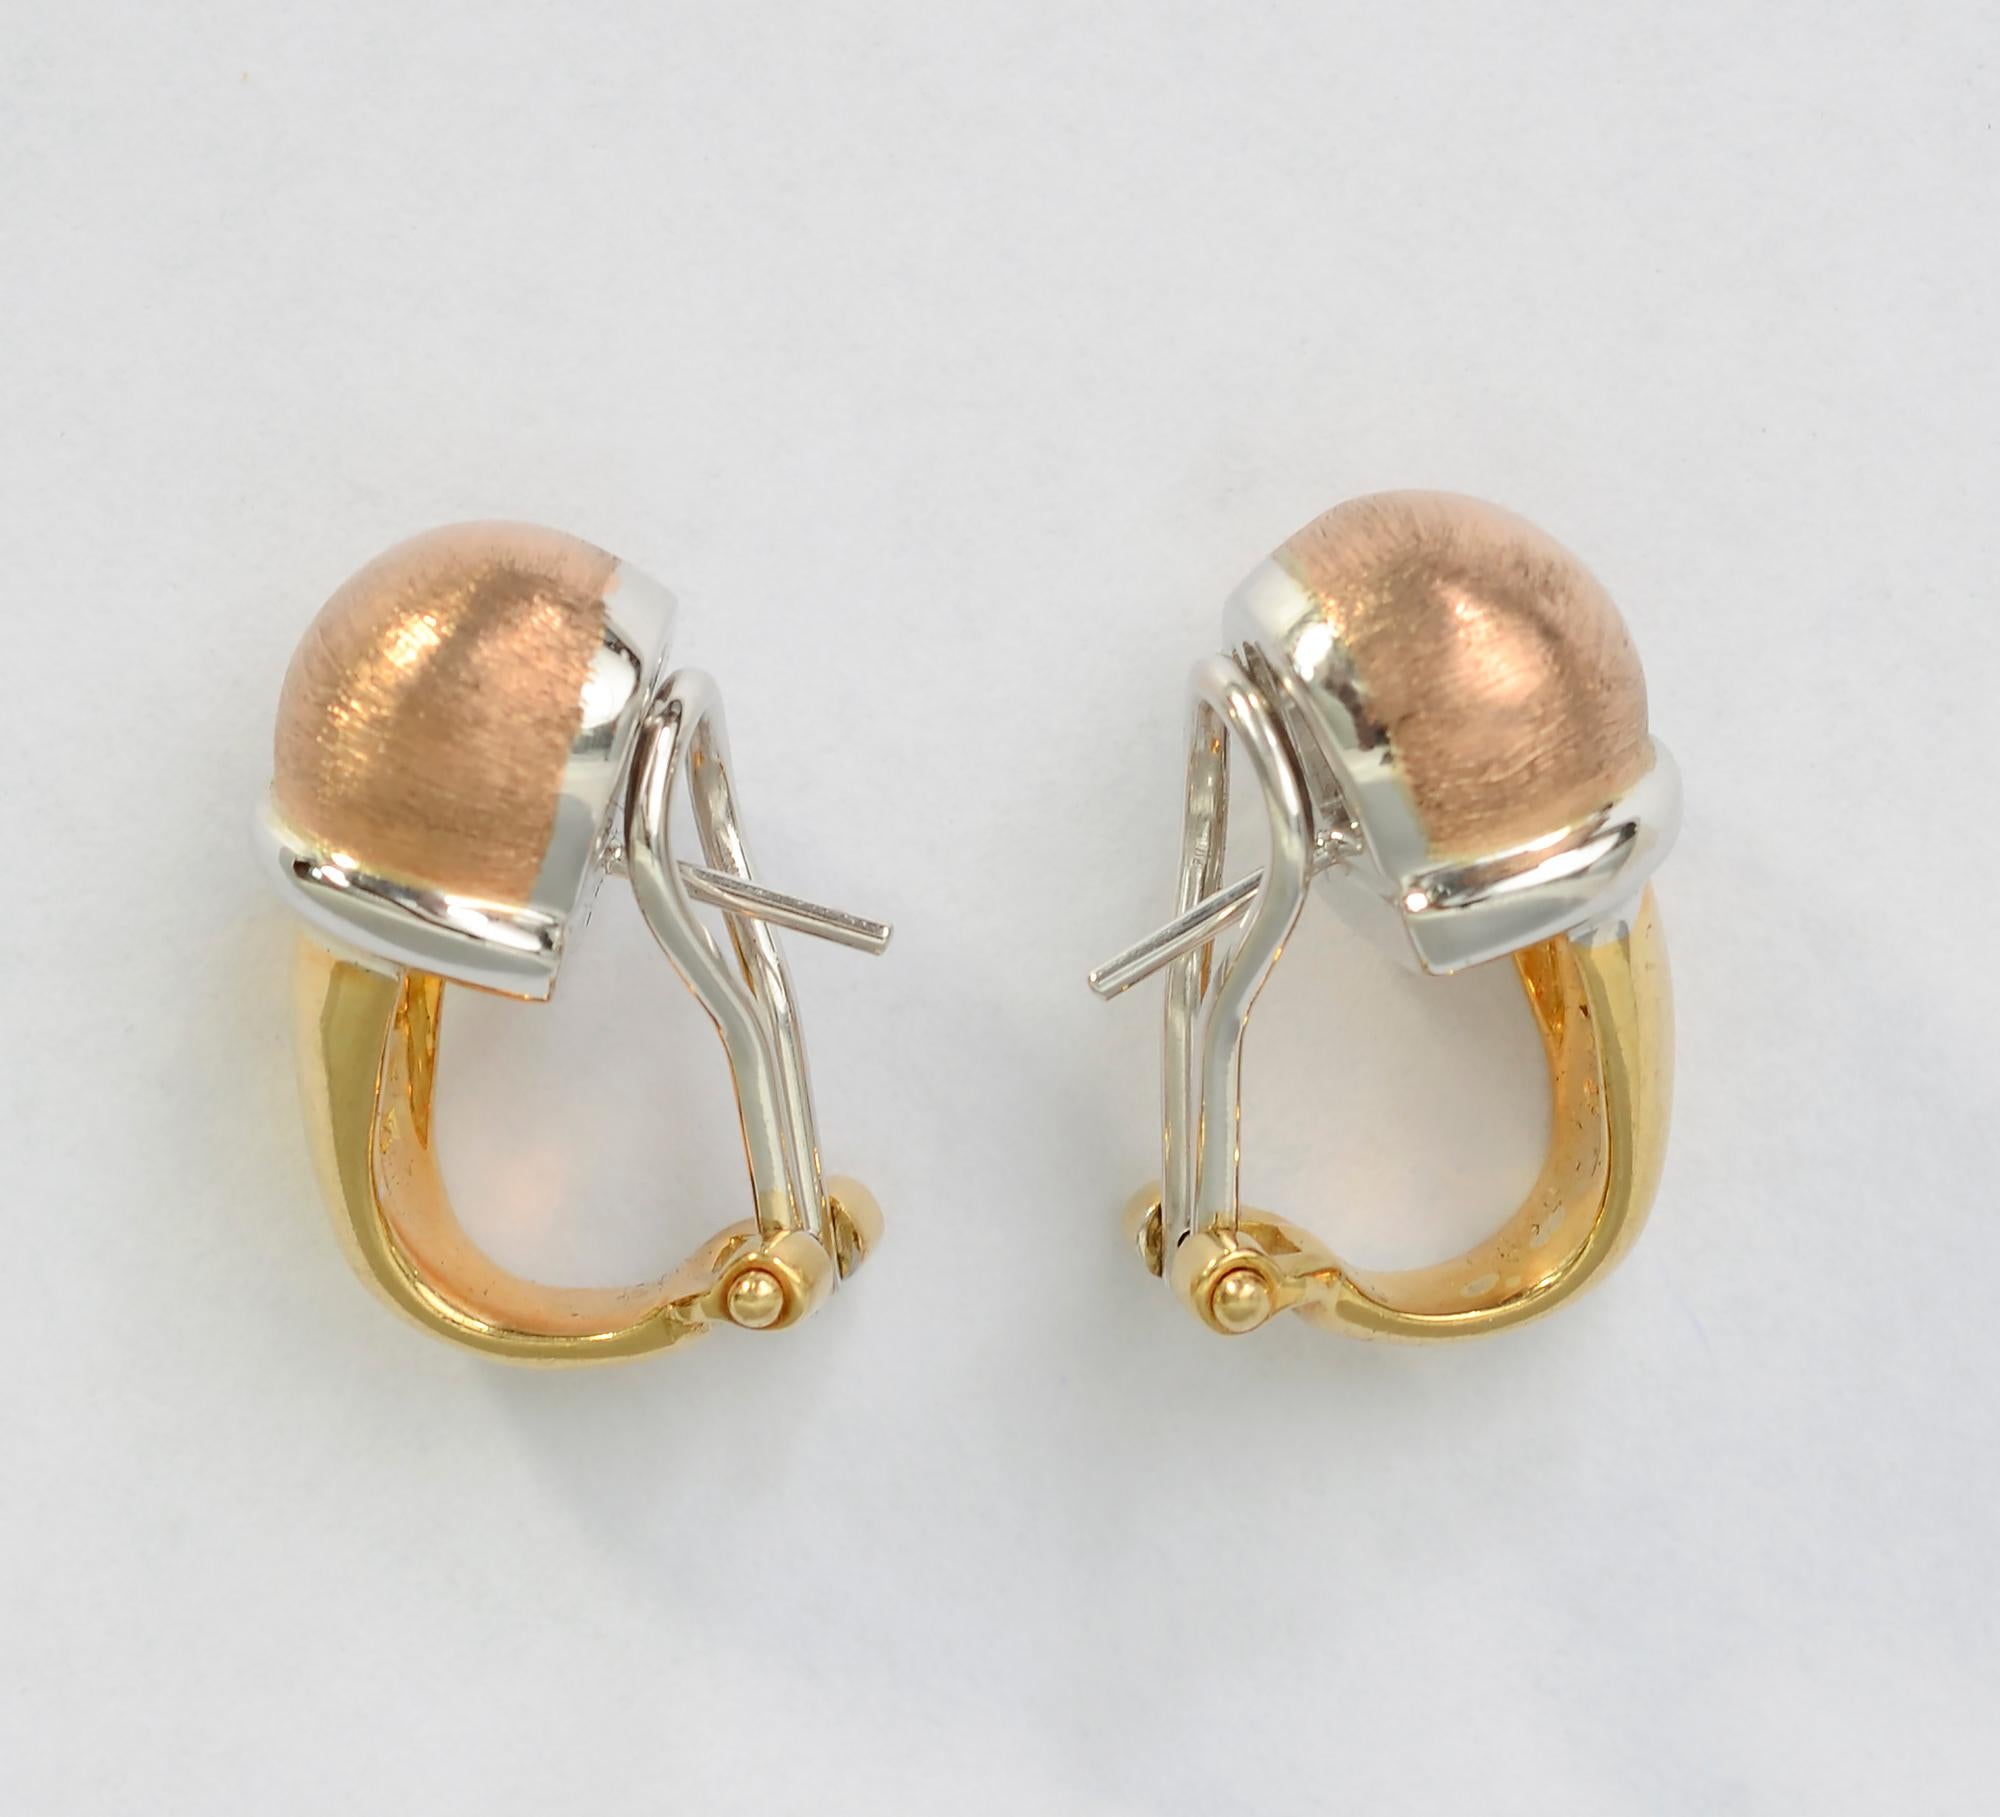 Unusual tricolor 18 karat gold earrings by Robert Coin. The rose gold bulb on top has a brushed finish with a gloss finish to the yellow and white gold . Backs are clips and posts.
While Coin is known for the hidden ruby used as part of his